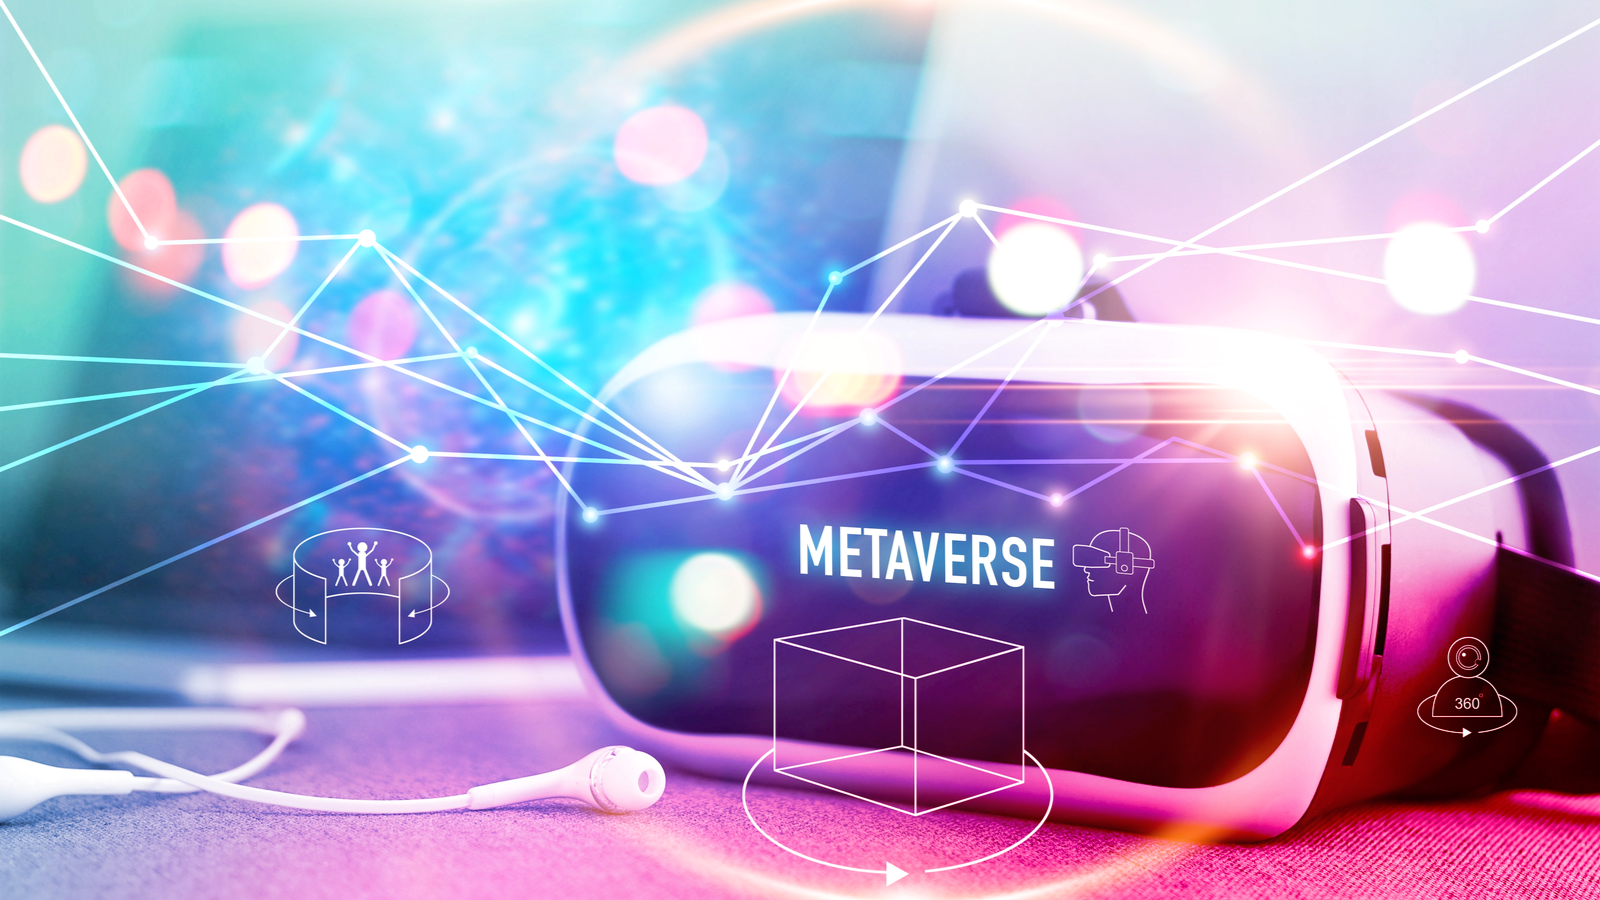 3 Metaverse Cryptos That Could Make You a Millionaire